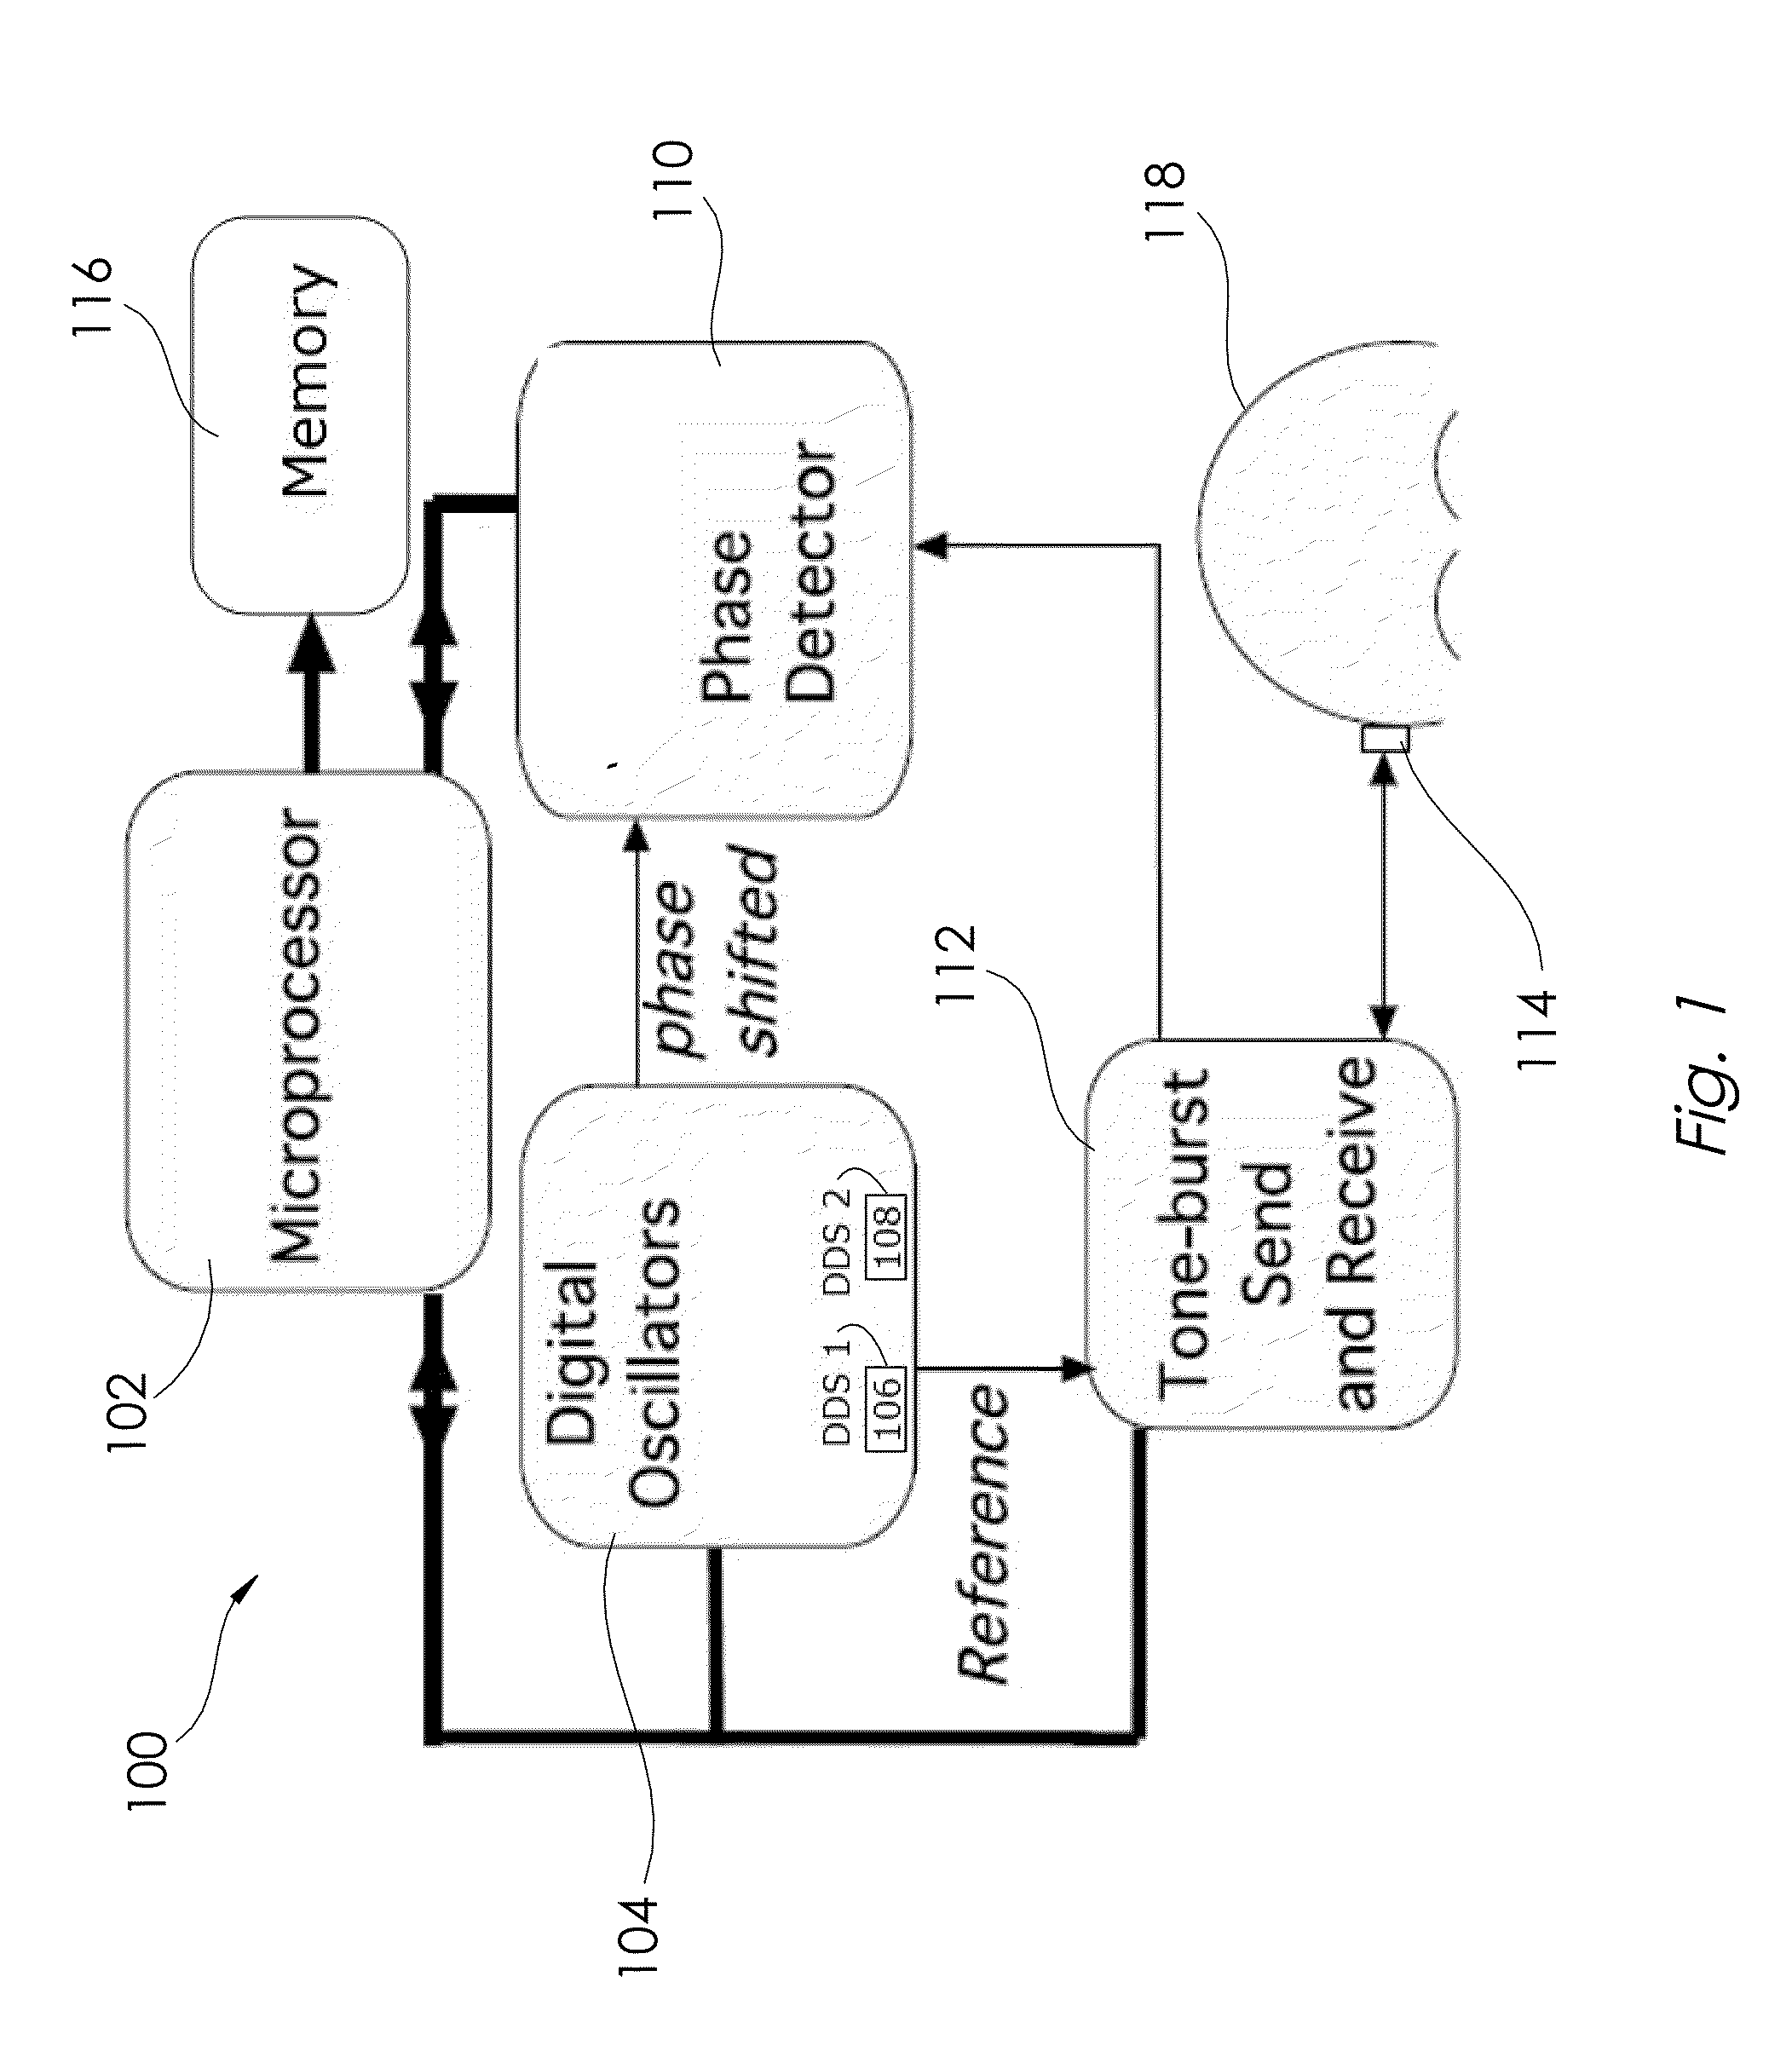 Systems and methods for measuring phase dynamics and other properties